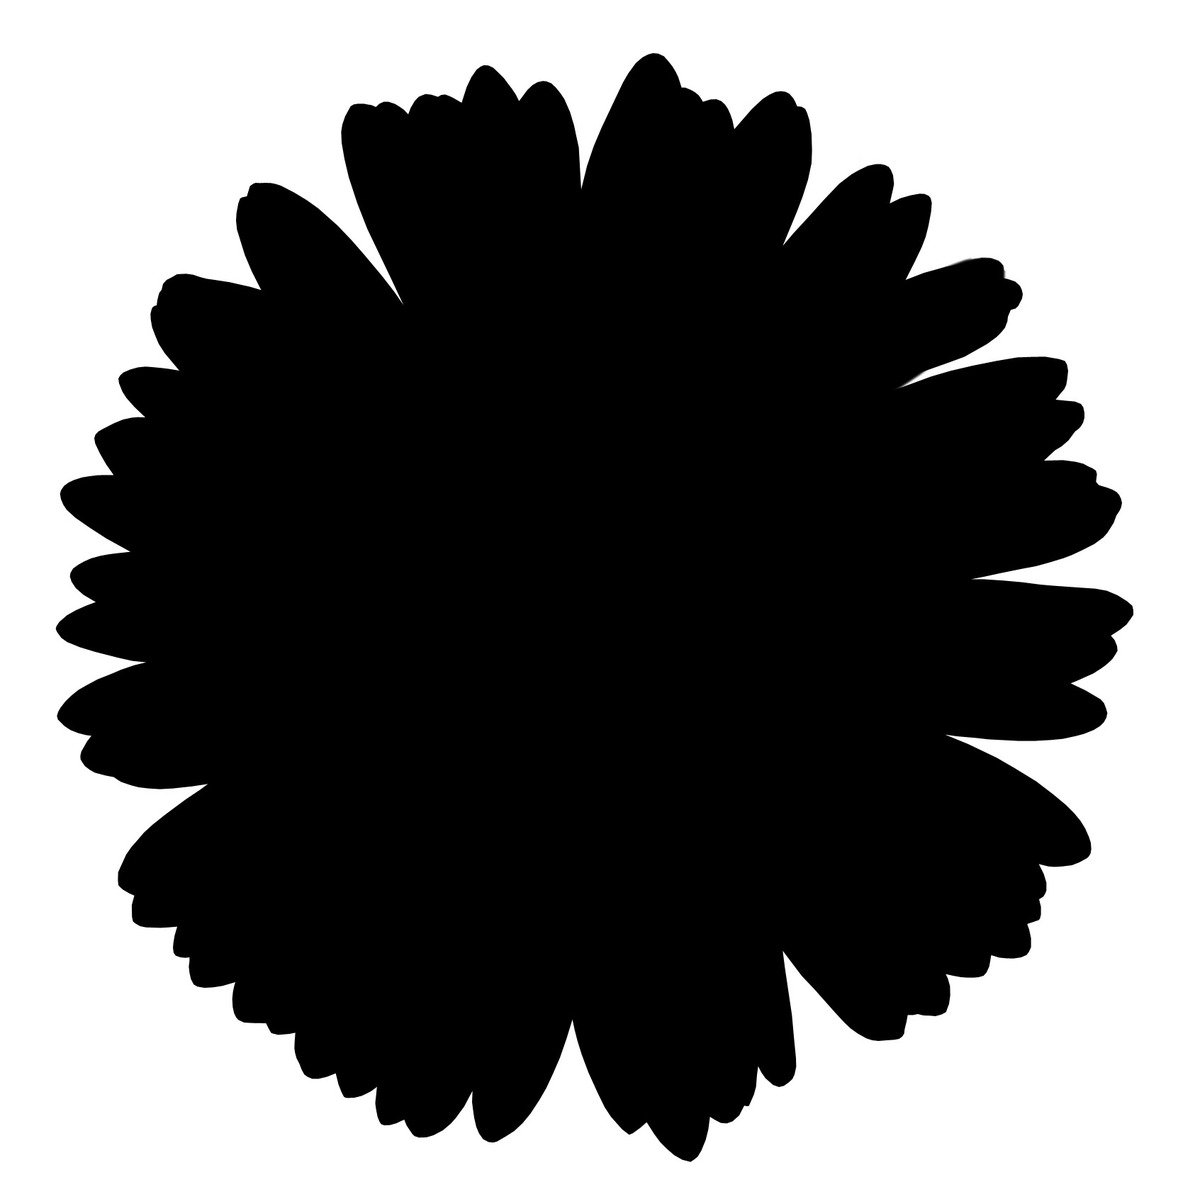 the silhouette of a large flower on a white background